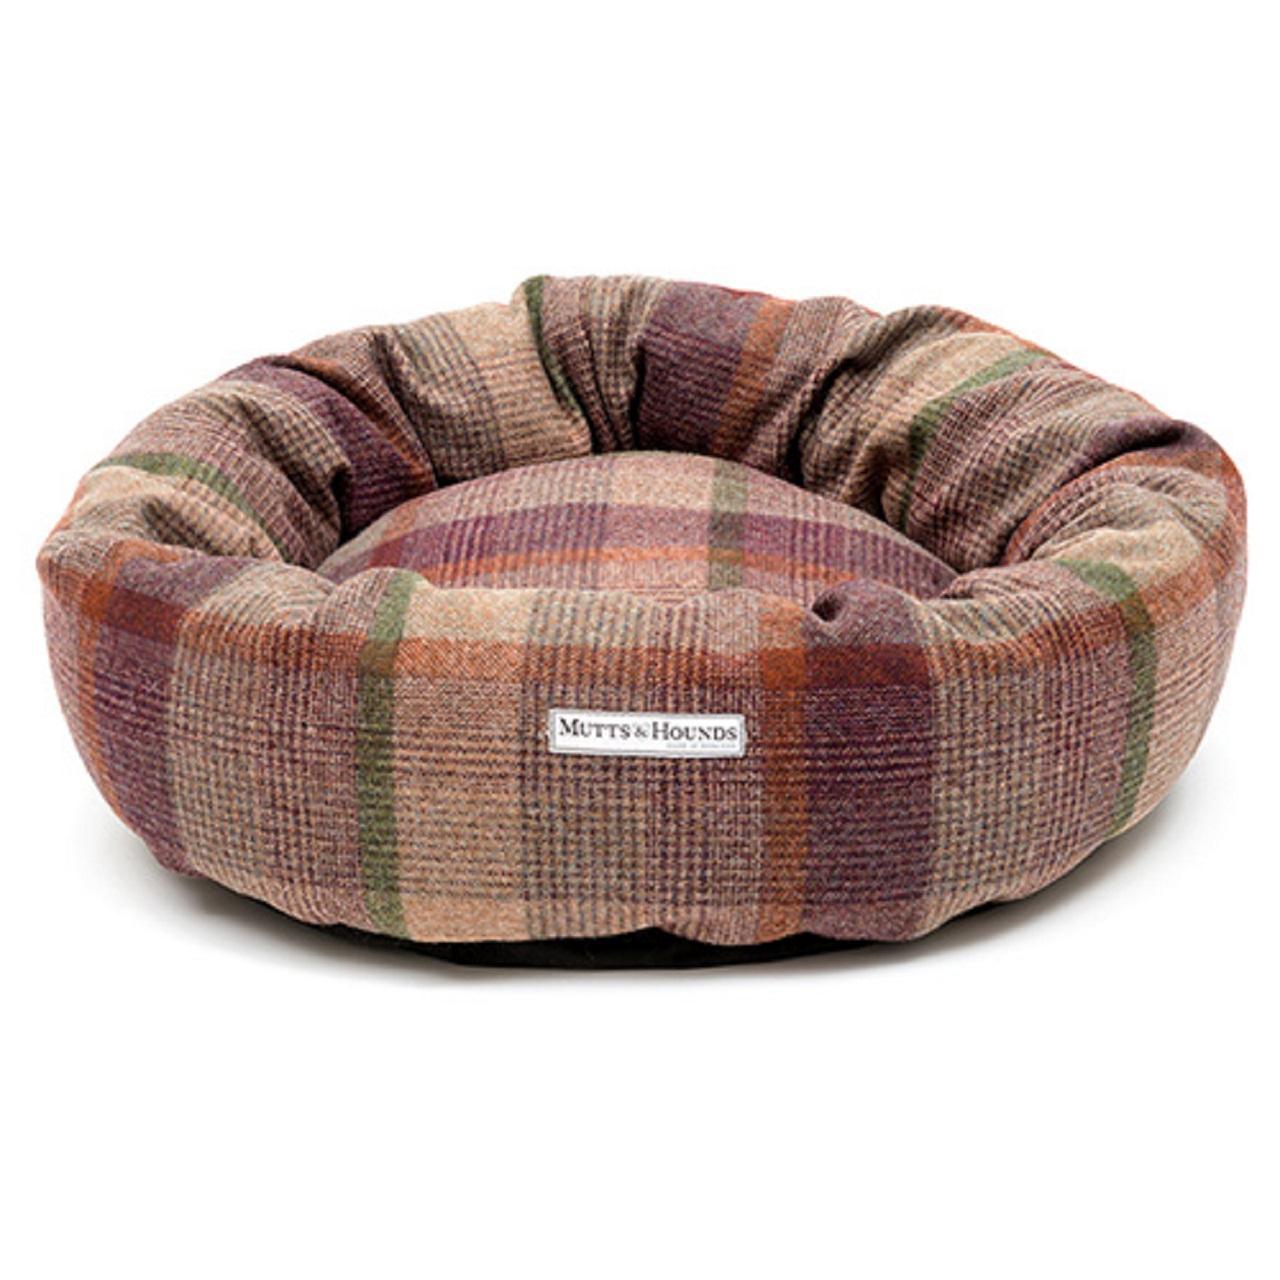 An image of Mutts & Hounds Grape Check Tweed Donut Bed Medium